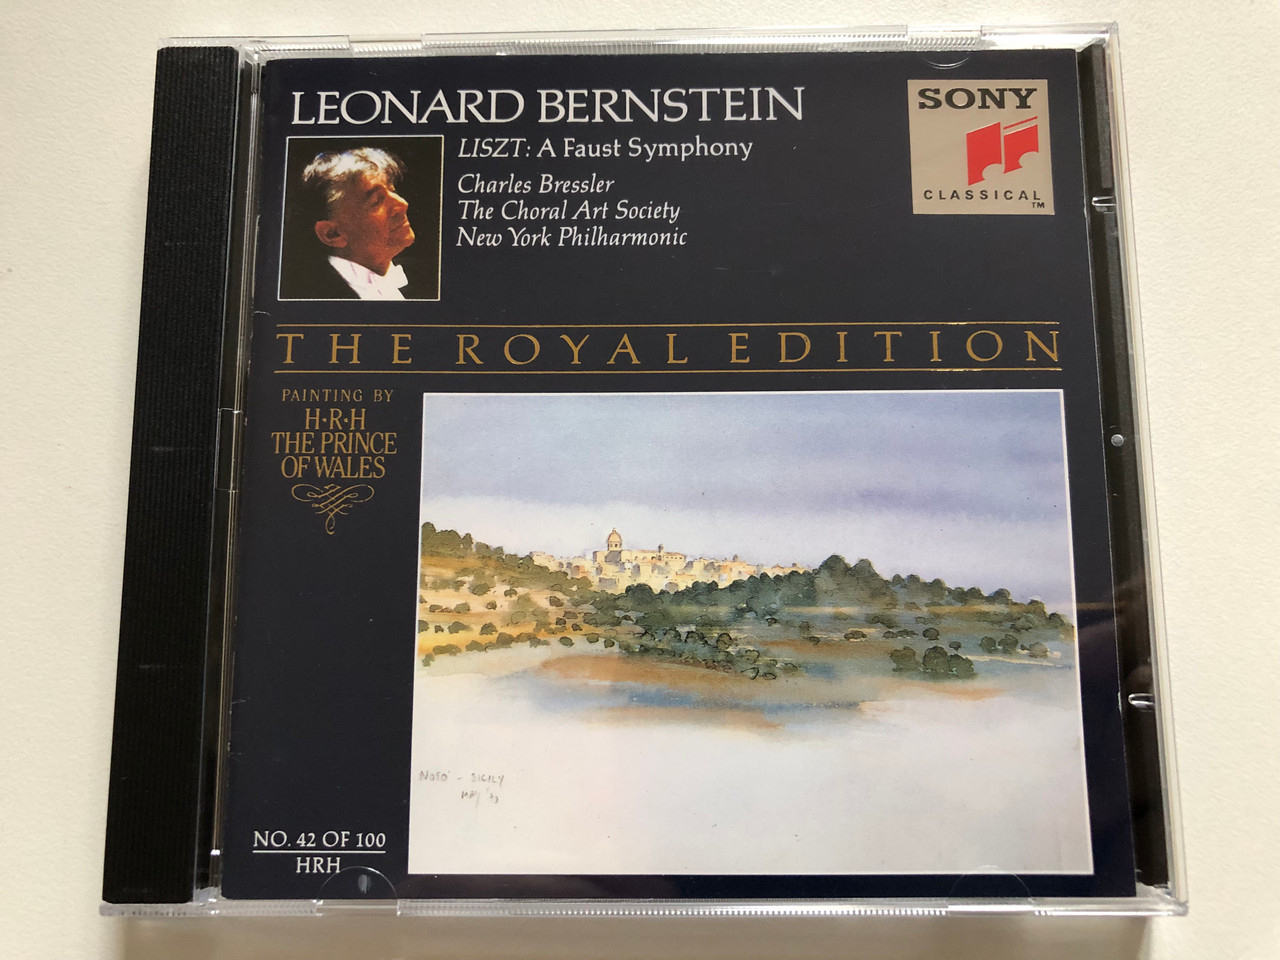 https://cdn10.bigcommerce.com/s-62bdpkt7pb/products/0/images/310953/Leonard_Bernstein_-_Liszt_A_Faust_Symphony_-_Charles_Bressler_The_Choral_Art_Society_New_York_Philharmonic_The_Royal_Edition_No._42_Of_100_Sony_Classical_Audio_CD_1992_SMK_47570_1__06242.1699461948.1280.1280.JPG?c=2